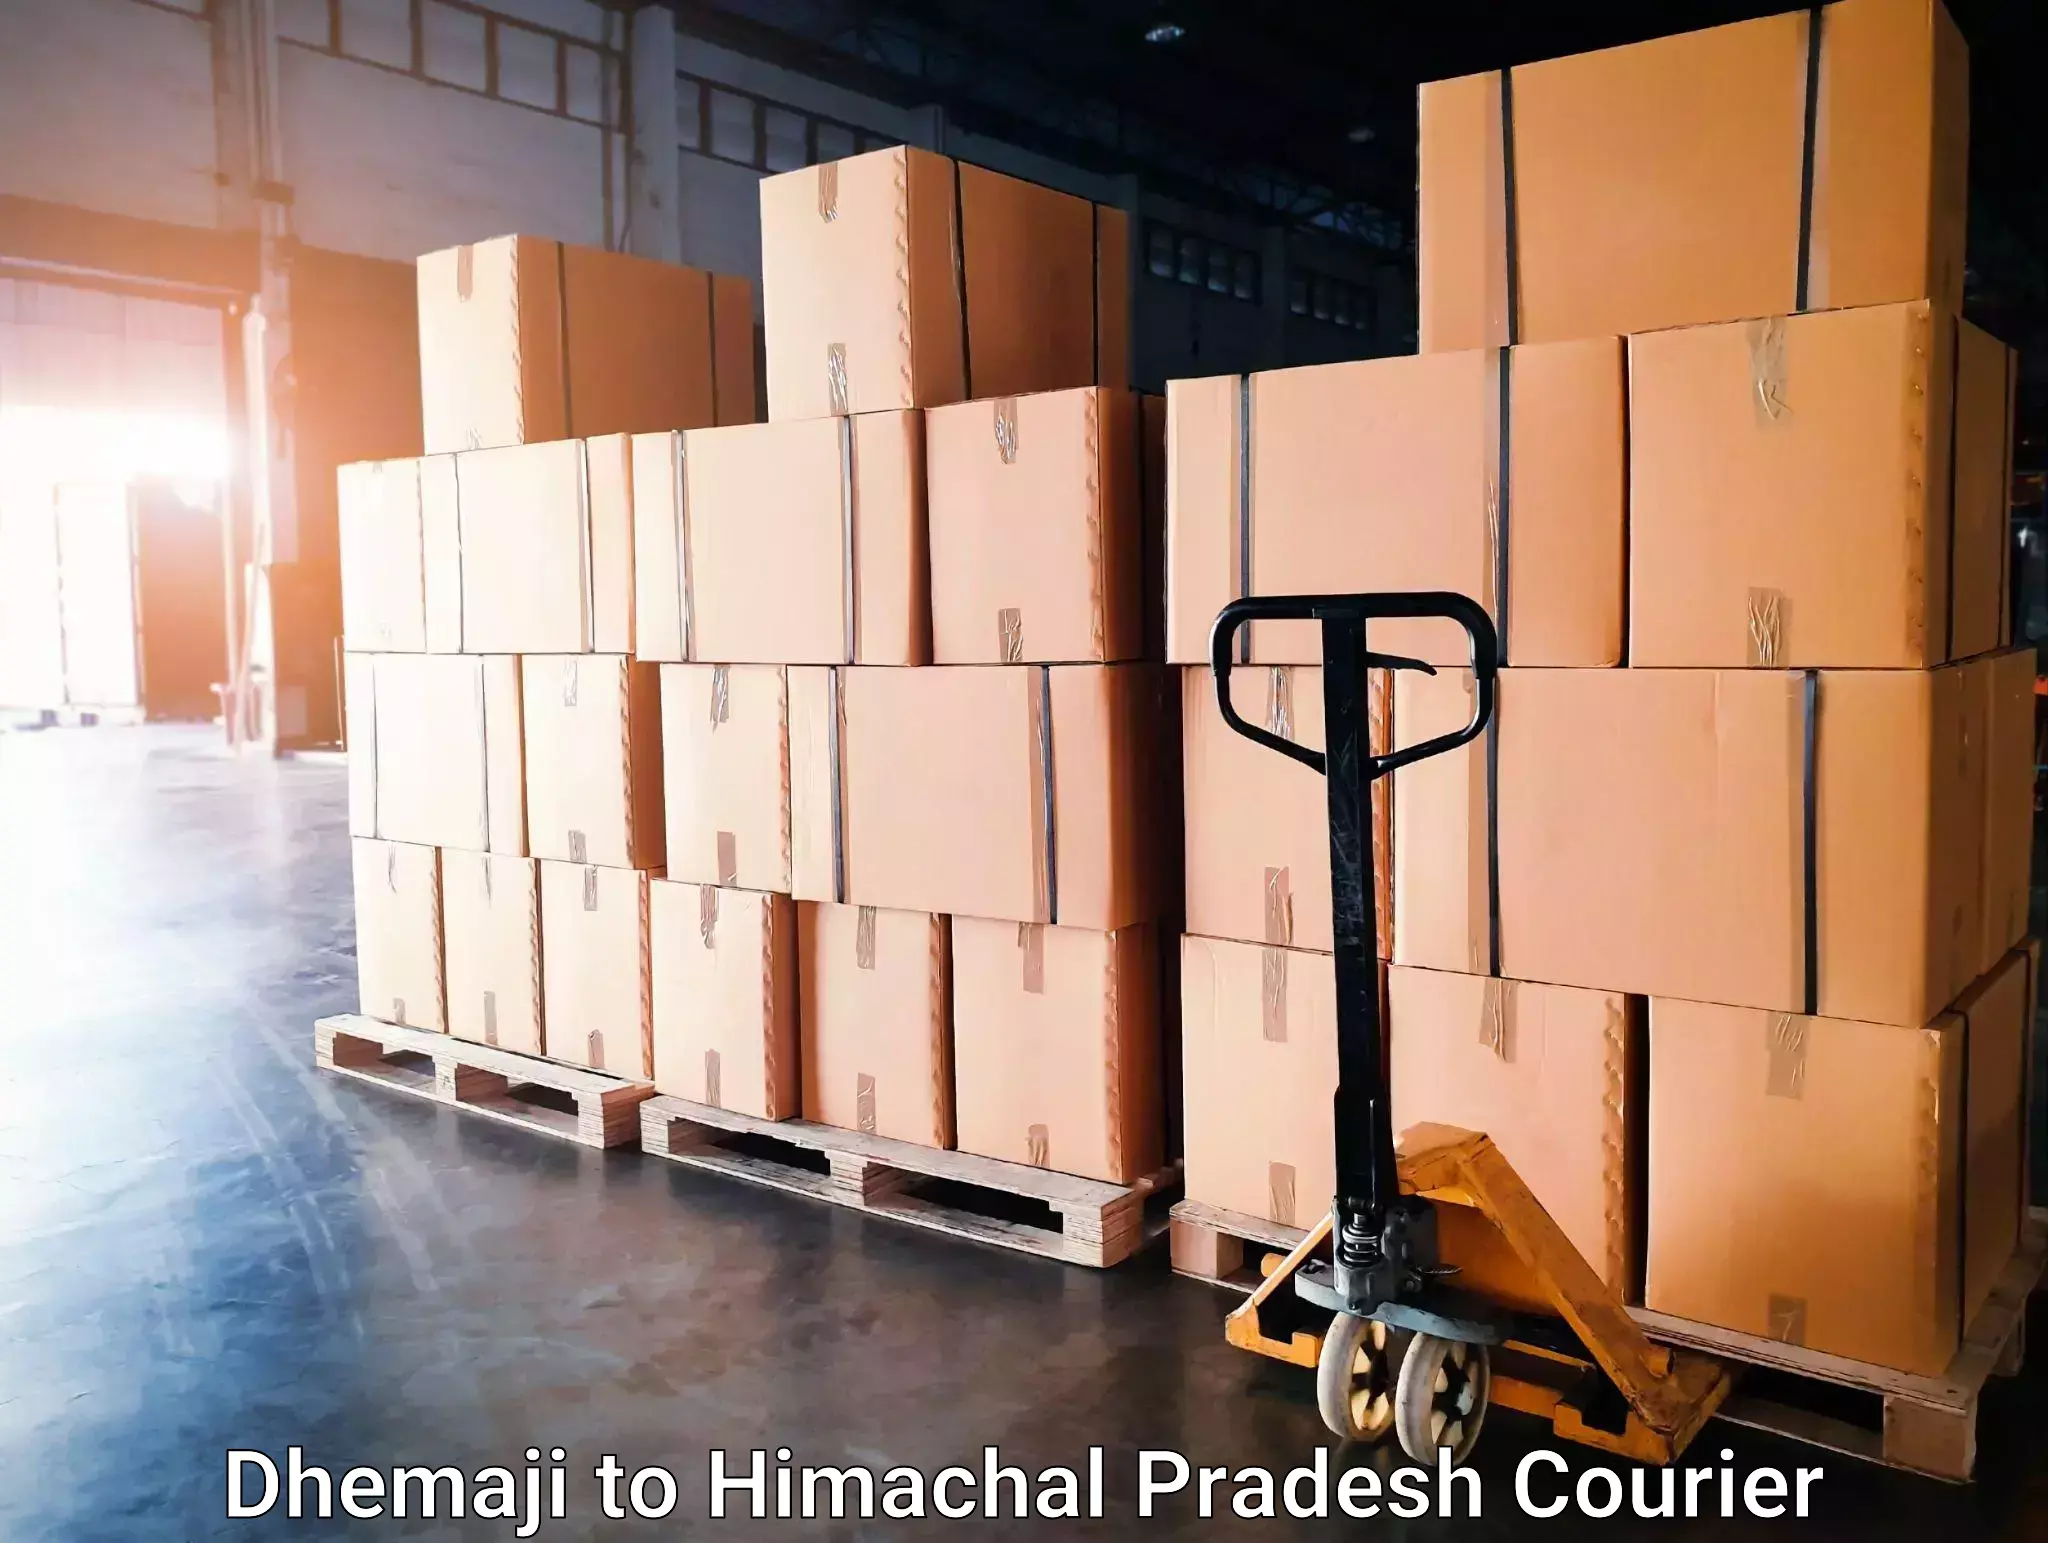 Package delivery network Dhemaji to Himachal Pradesh